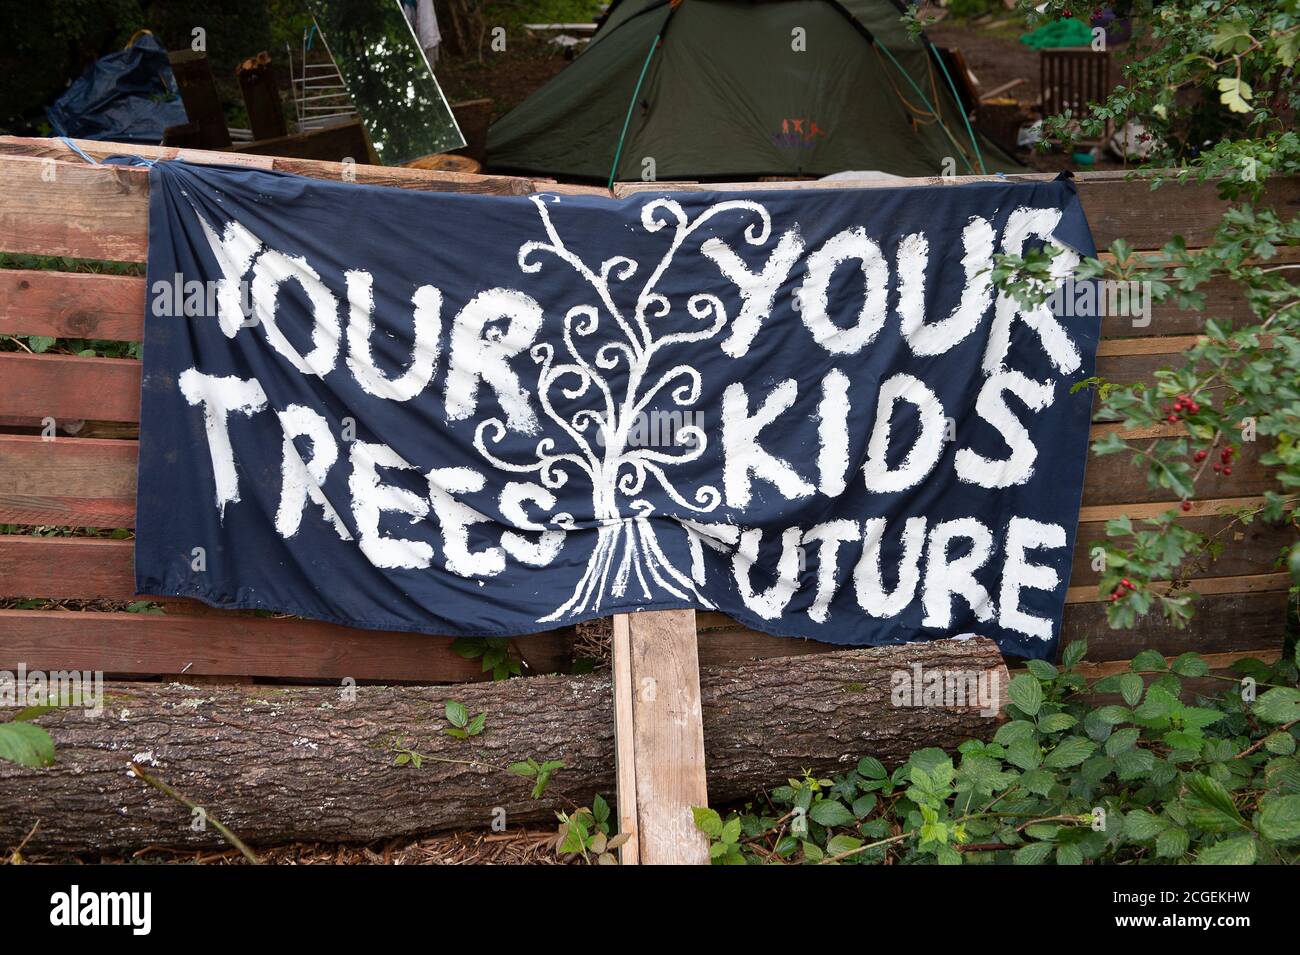 Denham, Buckinghamshire, UK. 8th September, 2020. A Your trees, your kids future, stop HS2 banner at the  camp entrance. A new injuction barring environmental activists and tree protectors from land in the Denham Country Park has been granted to HS2. The National Eviction Team and Police Liasion Officers were at the HS2 site today next to the HS2 Denham Protection Camp as a young female tree protector scaled one of the many trees to be felled by HS2. The controversial HS2 High Speed Rail link is set to damage or destroy 108 ancient woodlands. Credit: Maureen McLean/Alamy Stock Photo